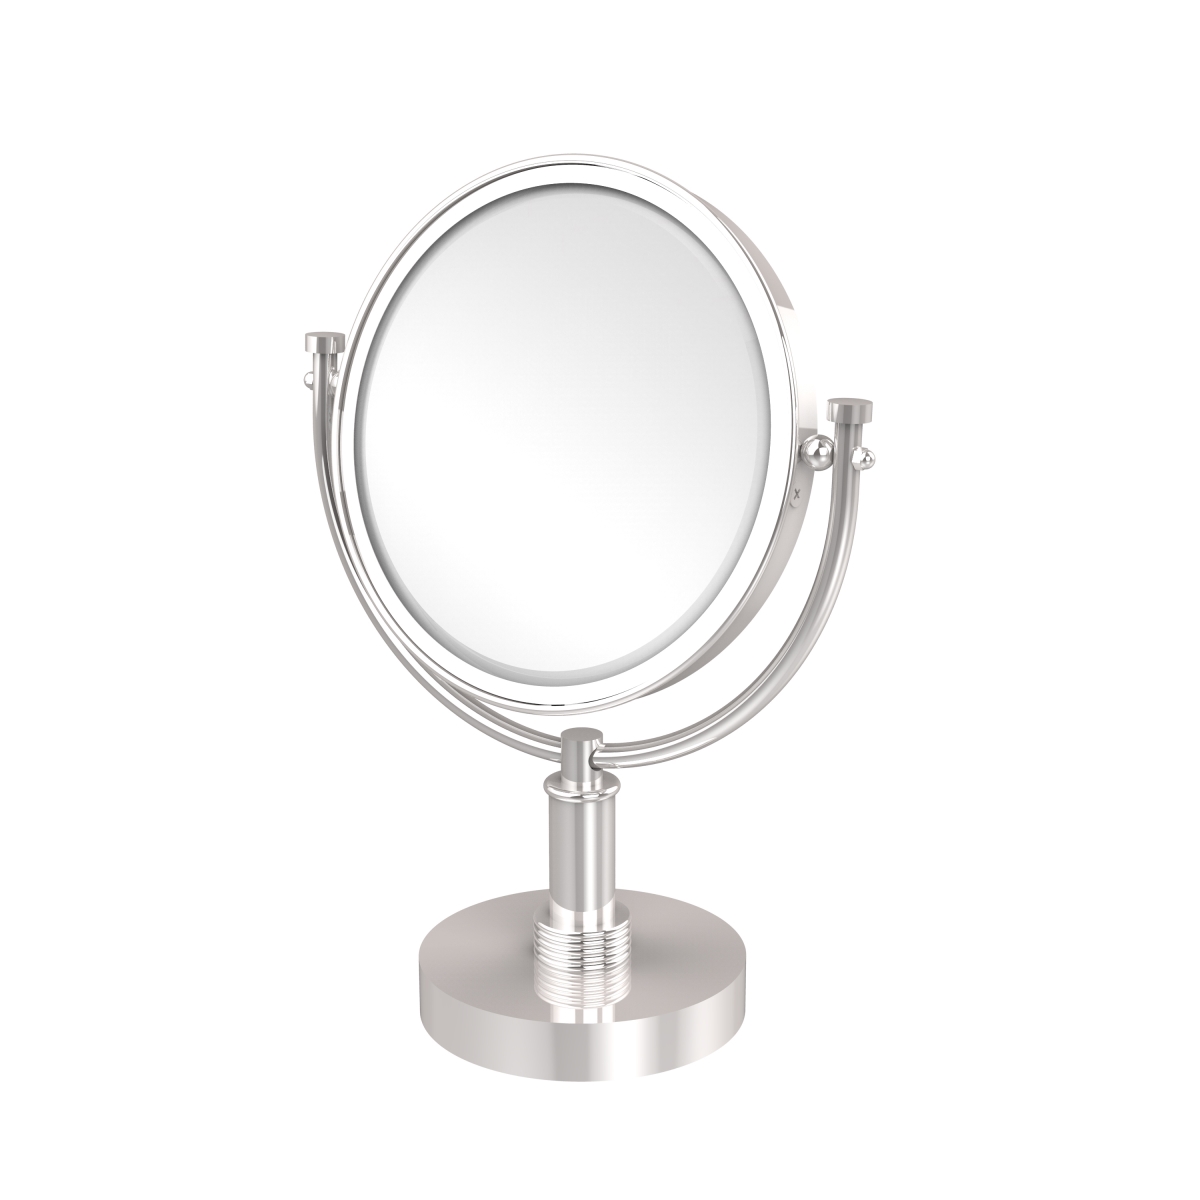 DM-4G-2X-PC 8 in. Vanity Top Make-Up Mirror 2X Magnification, Polished Chrome - 15 x 8 x 8 in -  Allied Brass, DM-4G/2X-PC